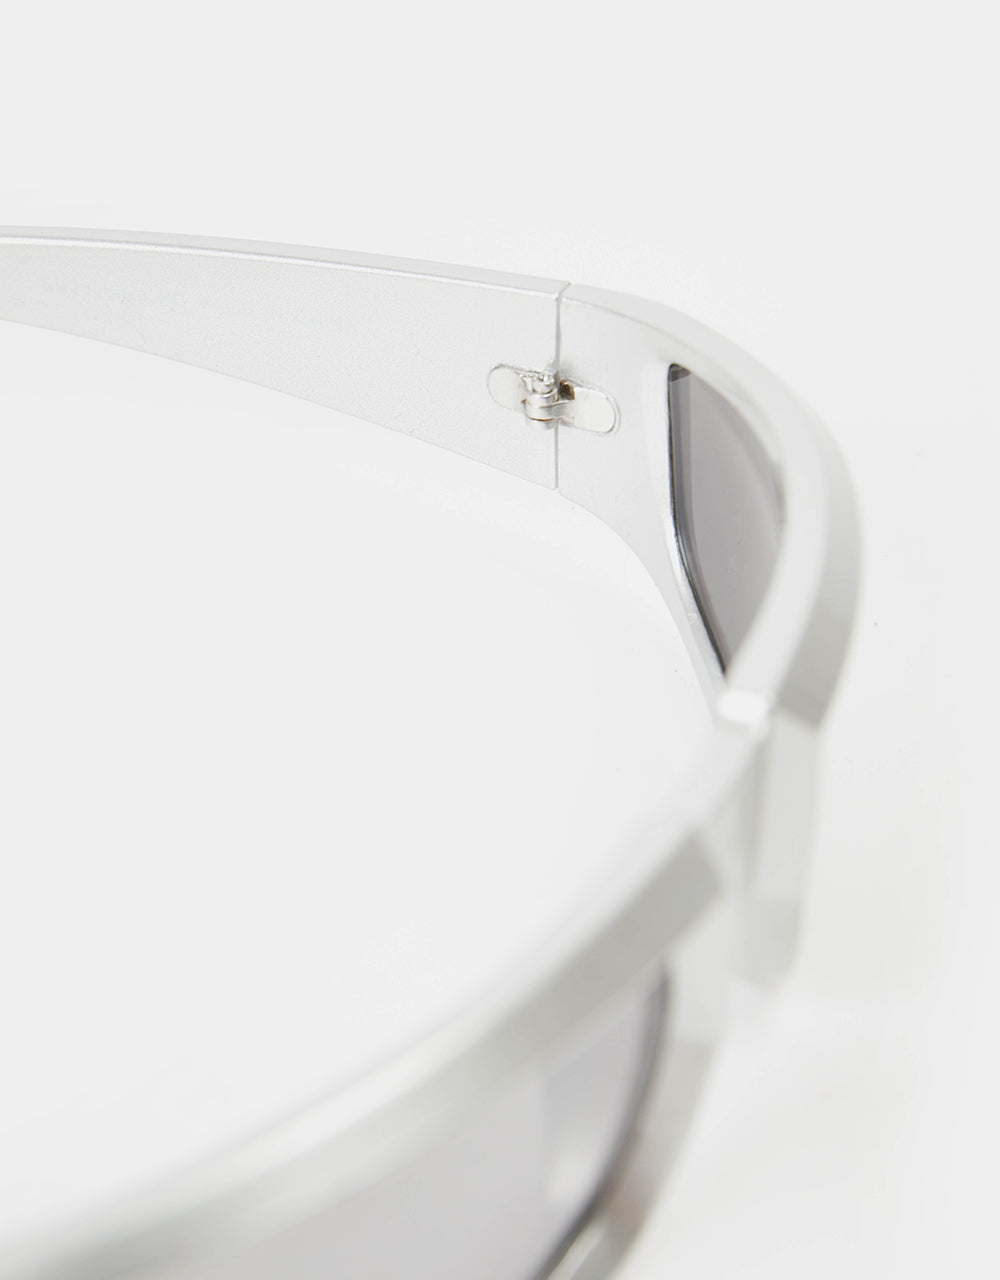 Route One Racer Sunglasses - Silver